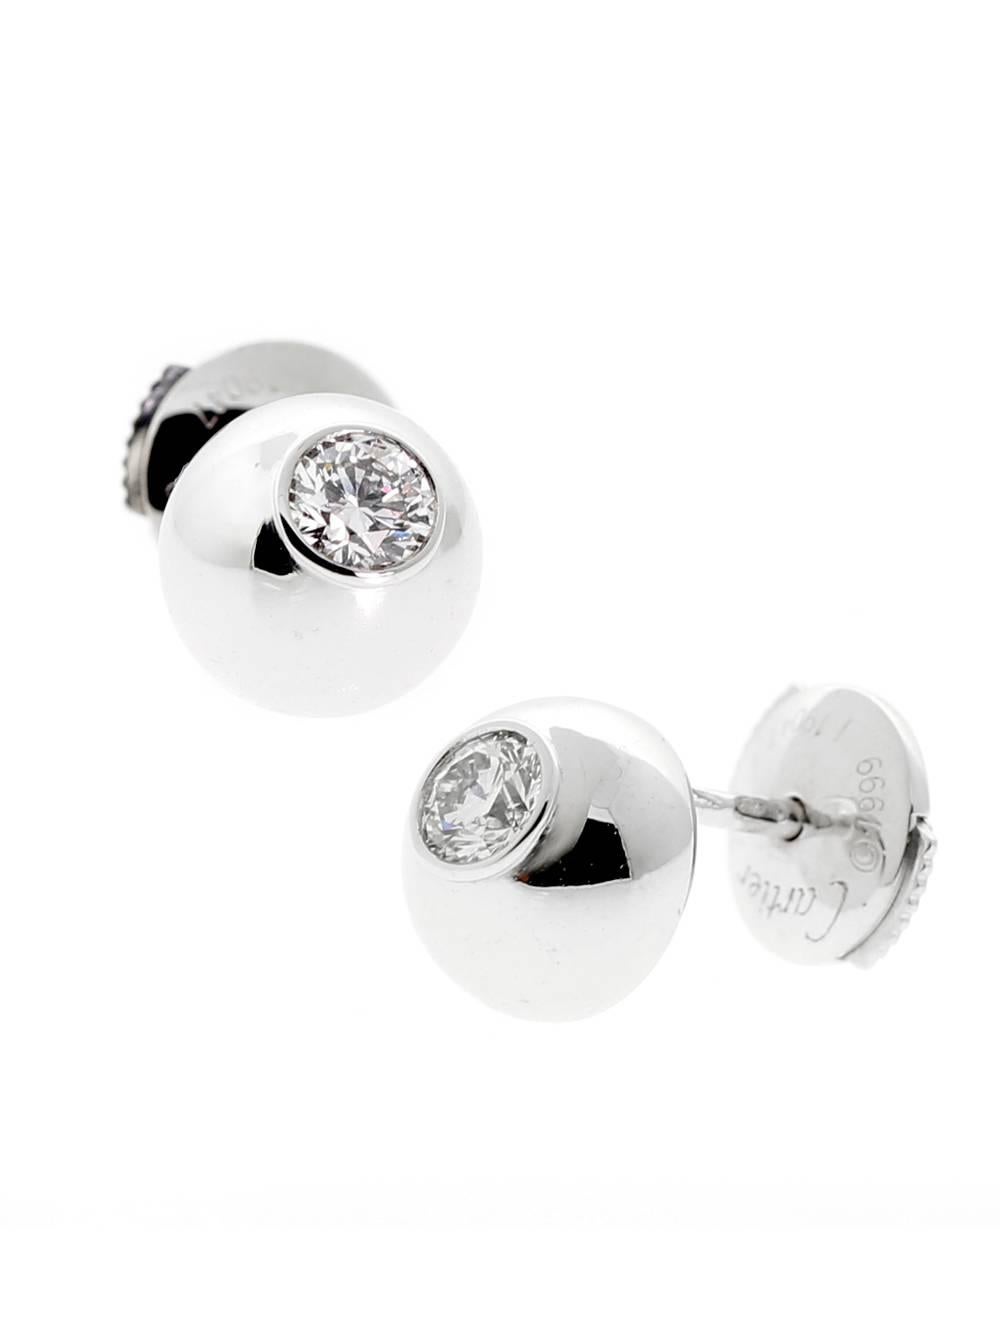 A chic pair of Cartier diamond stud earrings set in 18k white gold. The diamonds have a total weight of .42ct and are VS quality F-G Color.

Inventory ID: 0000328